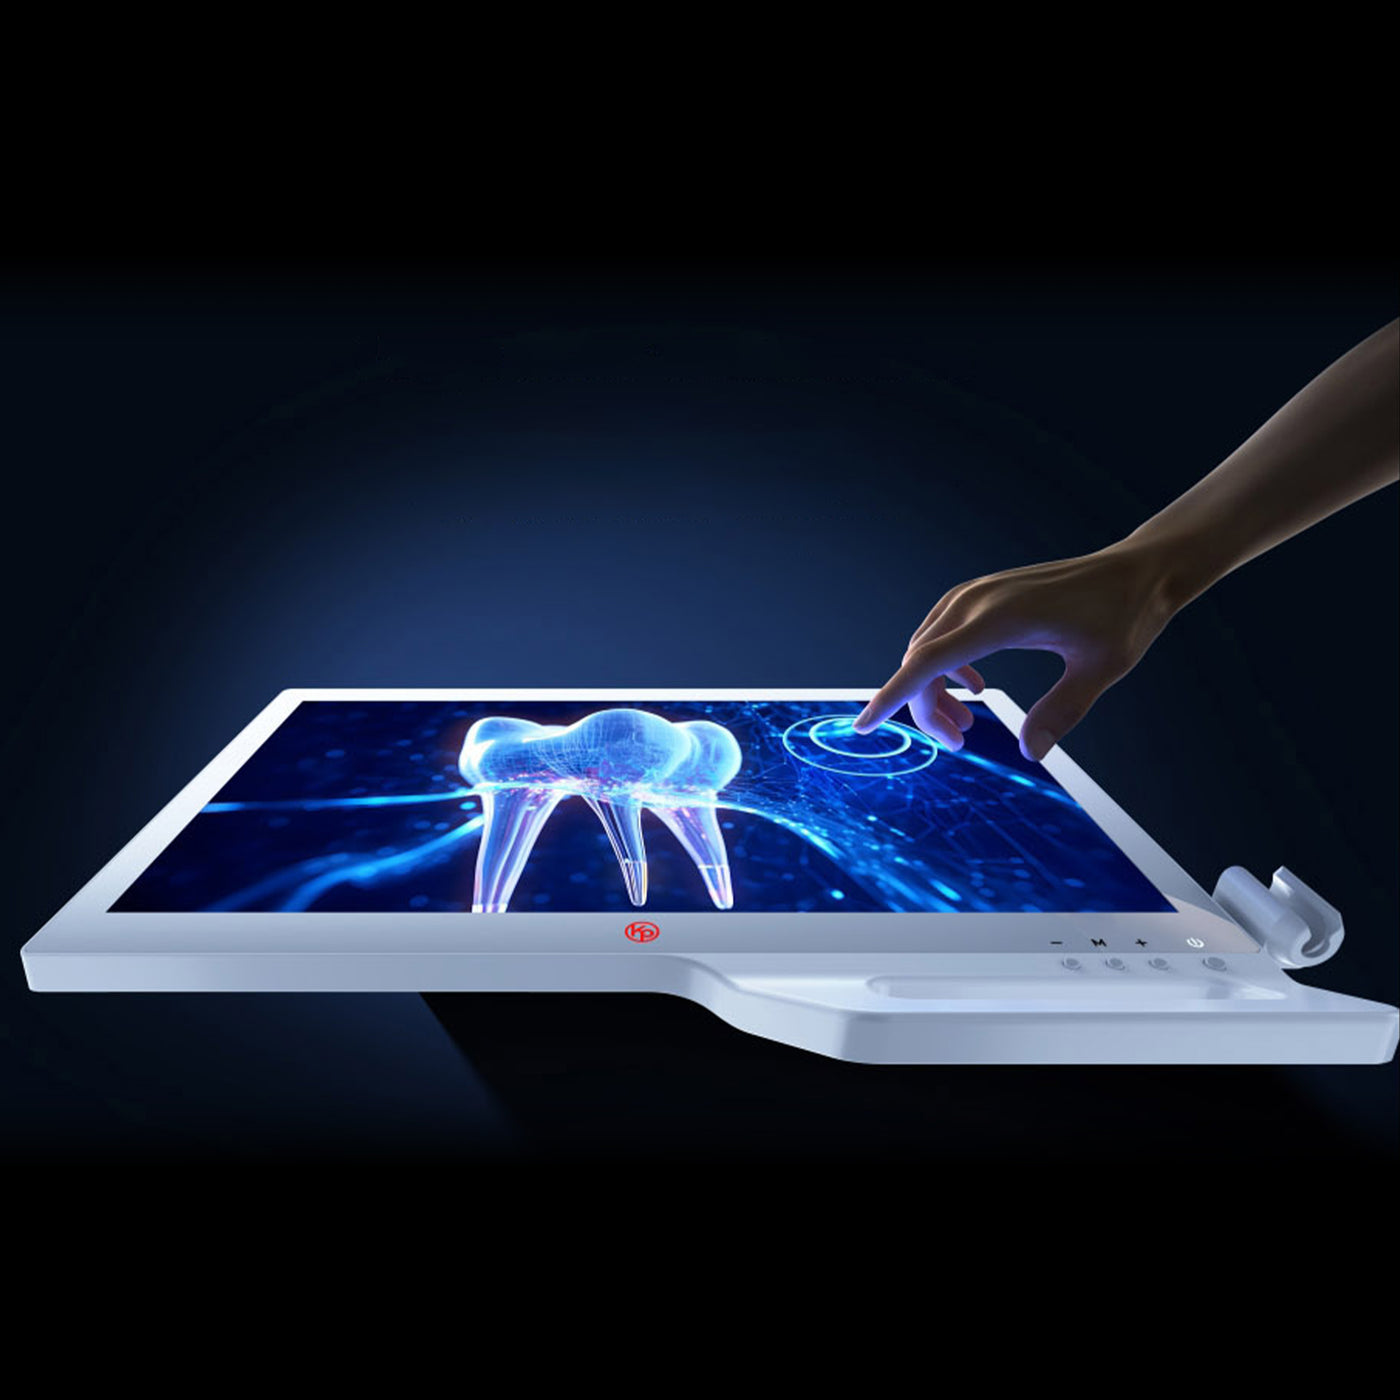 A hand interacts with a futuristic, illuminated touchscreen display showing a 3D hologram of a tooth captured by an Intraoral Camera KP Cam-one by VSDent. The background is dark, emphasizing the bright and intricate holographic image. (8951571841334)